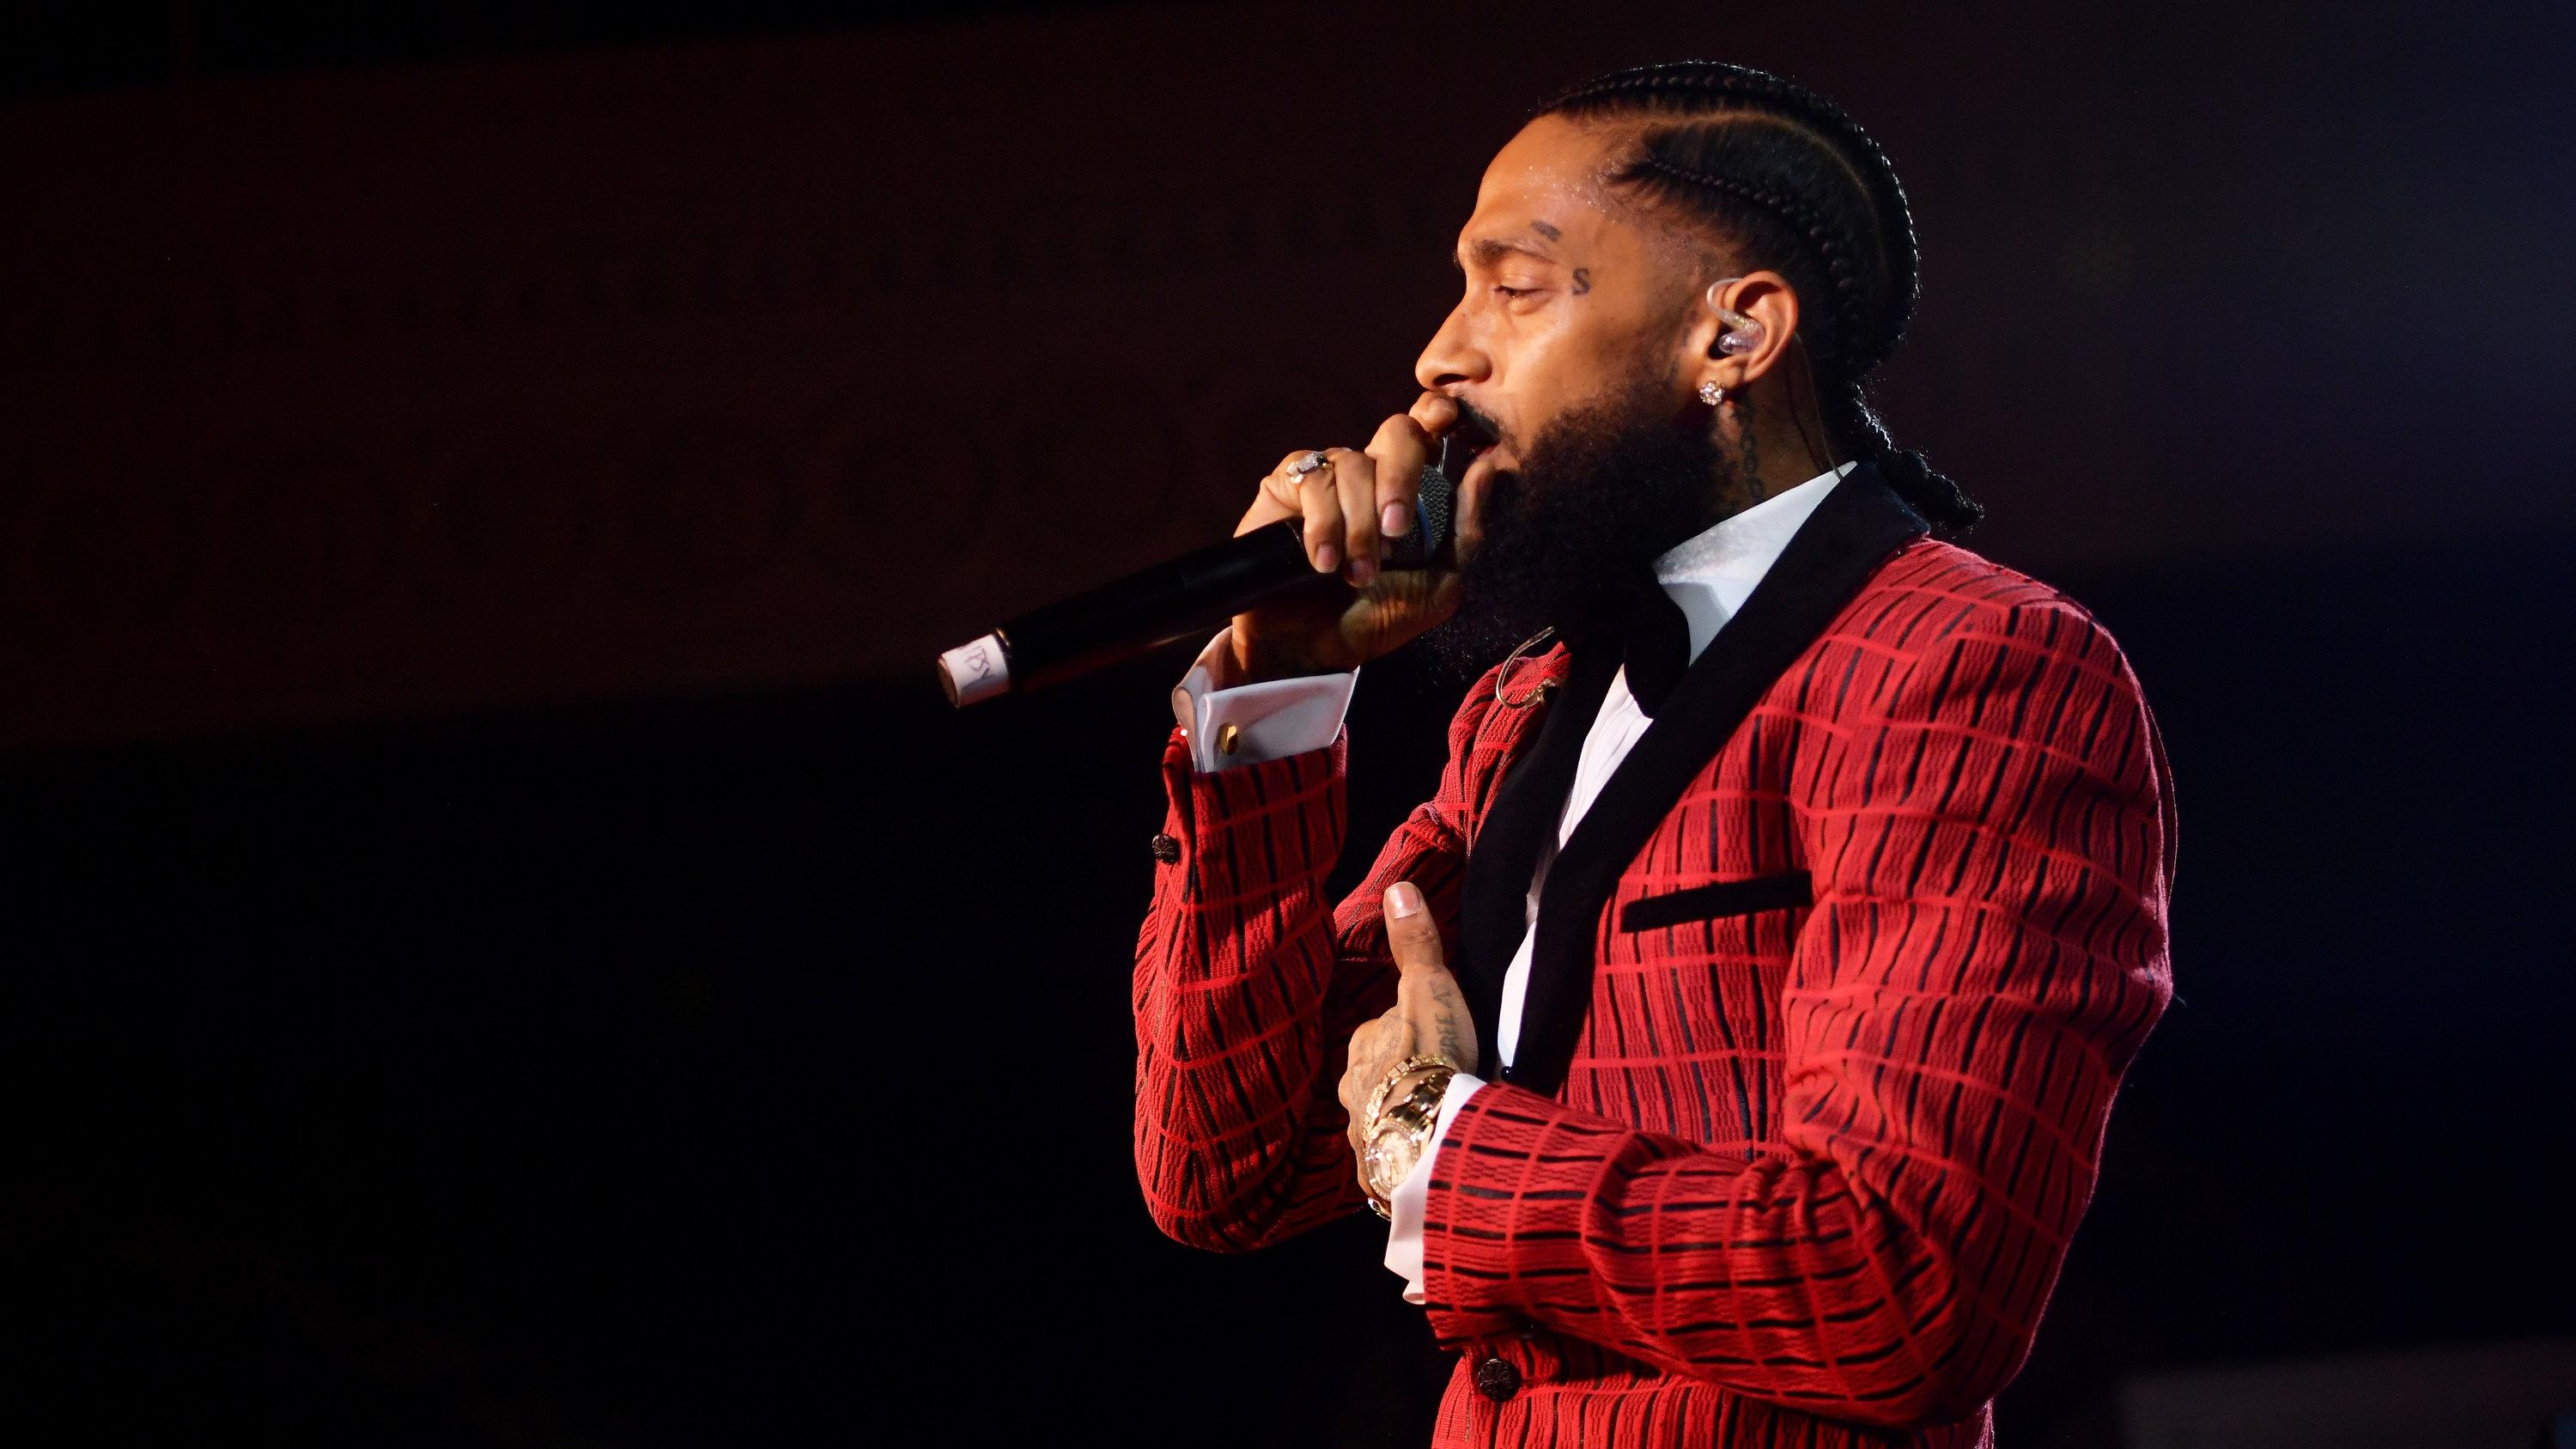 ‘He Meant a Lot’: Nipsey Hussle Is Mourned in Los Angeles